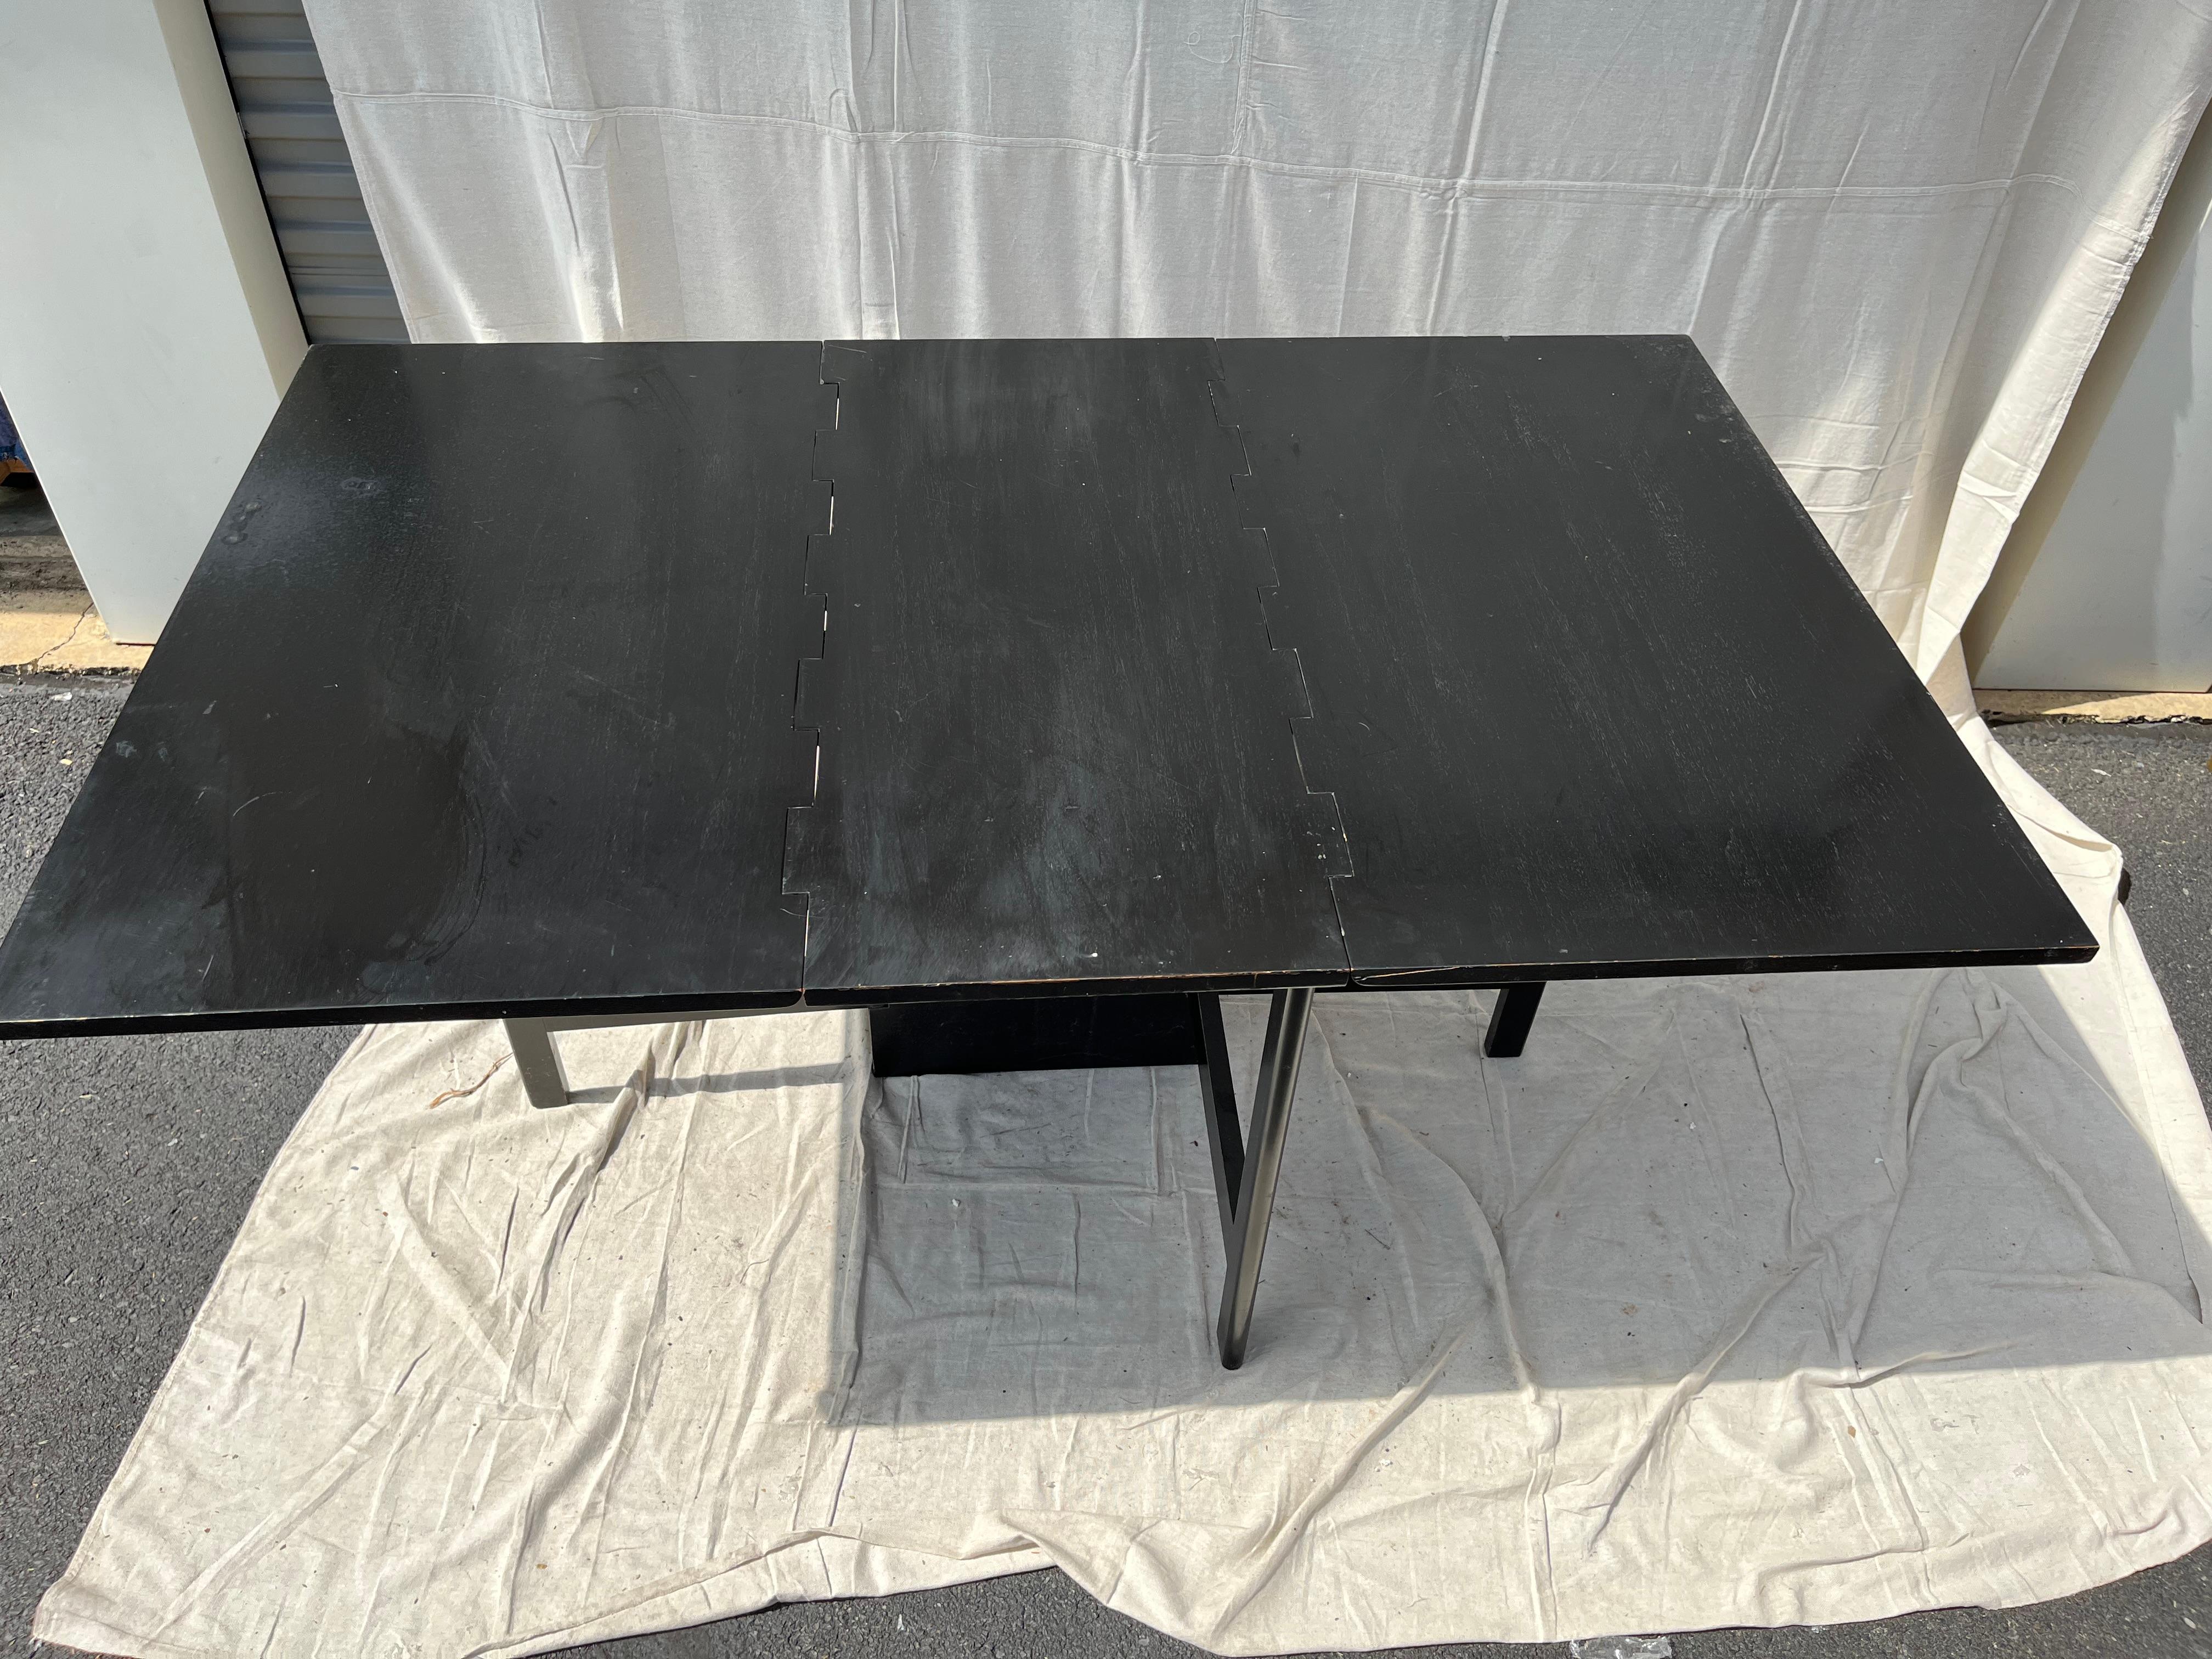 A modern gateleg drop-leaf dining table in black ebonized finish, nicely made. Measure: 18.5 inches deep when leaves dropped.